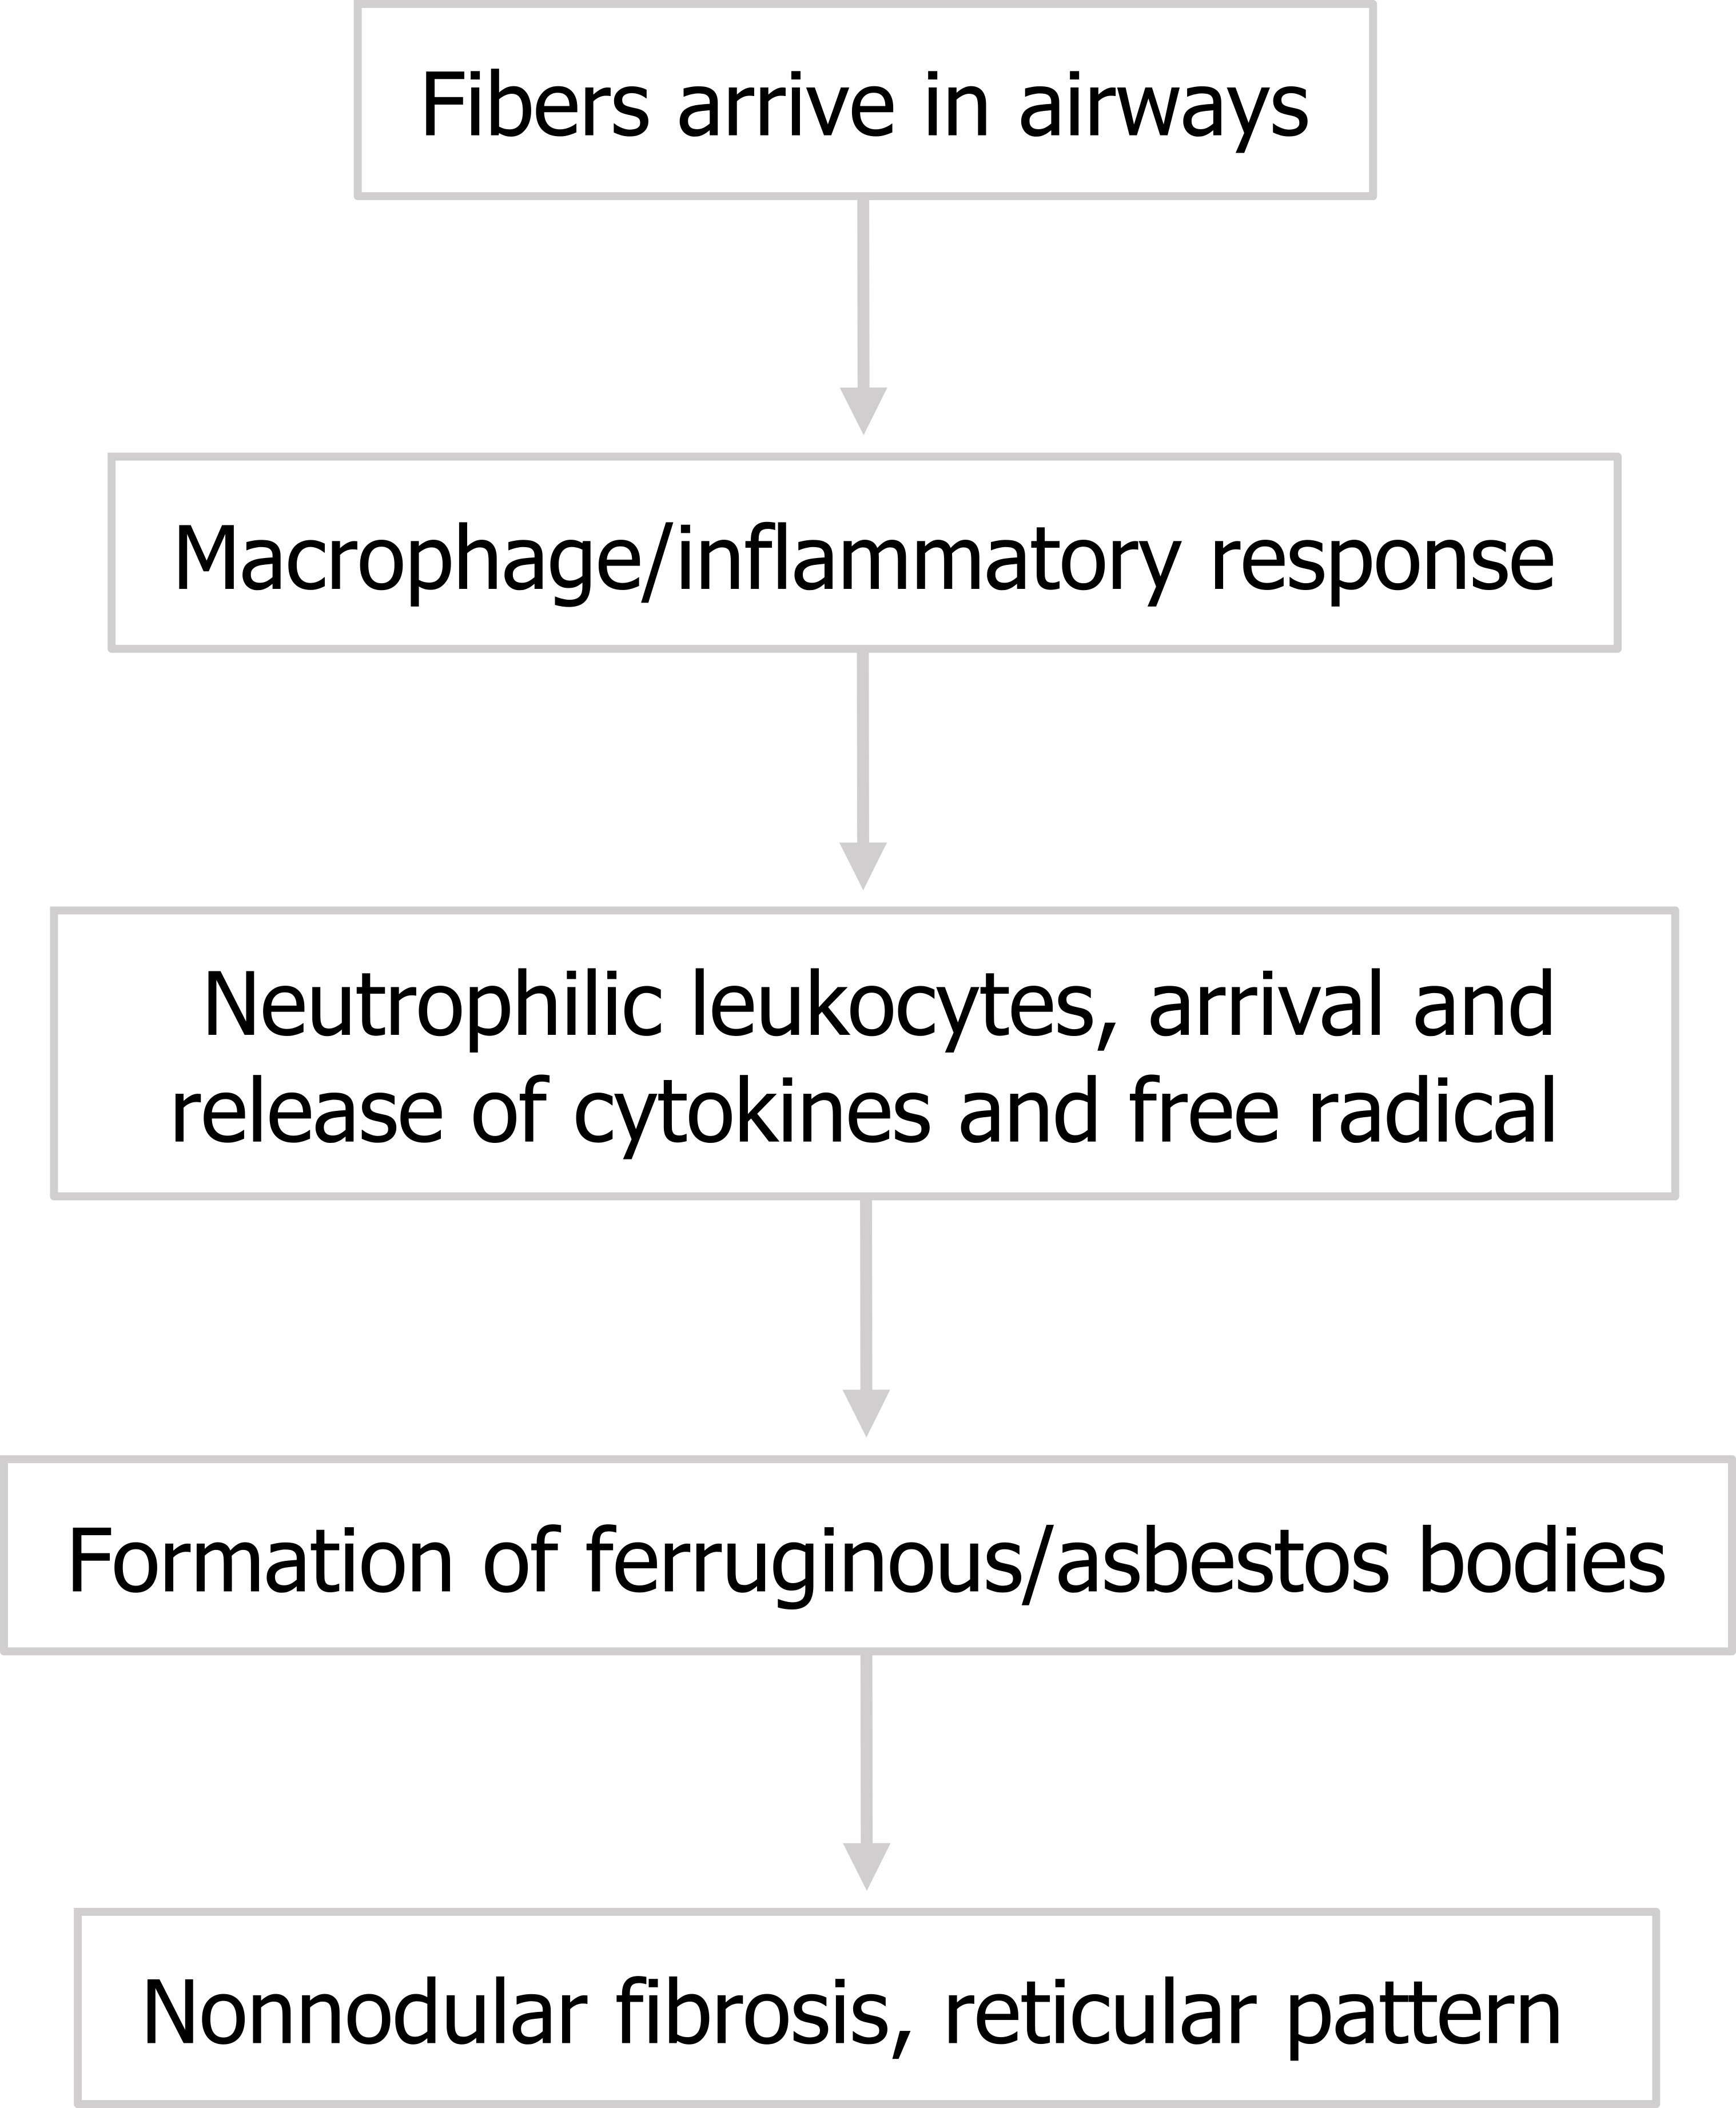 Fibers arrive in airways arrow to macrophage/inflammatory response arrow to neutrophilic leukocytes arrival and release of cytokines and free radical arrow to formation of ferruginous/asbestos bodies arrow to non-nodular fibrosis, reticular pattern